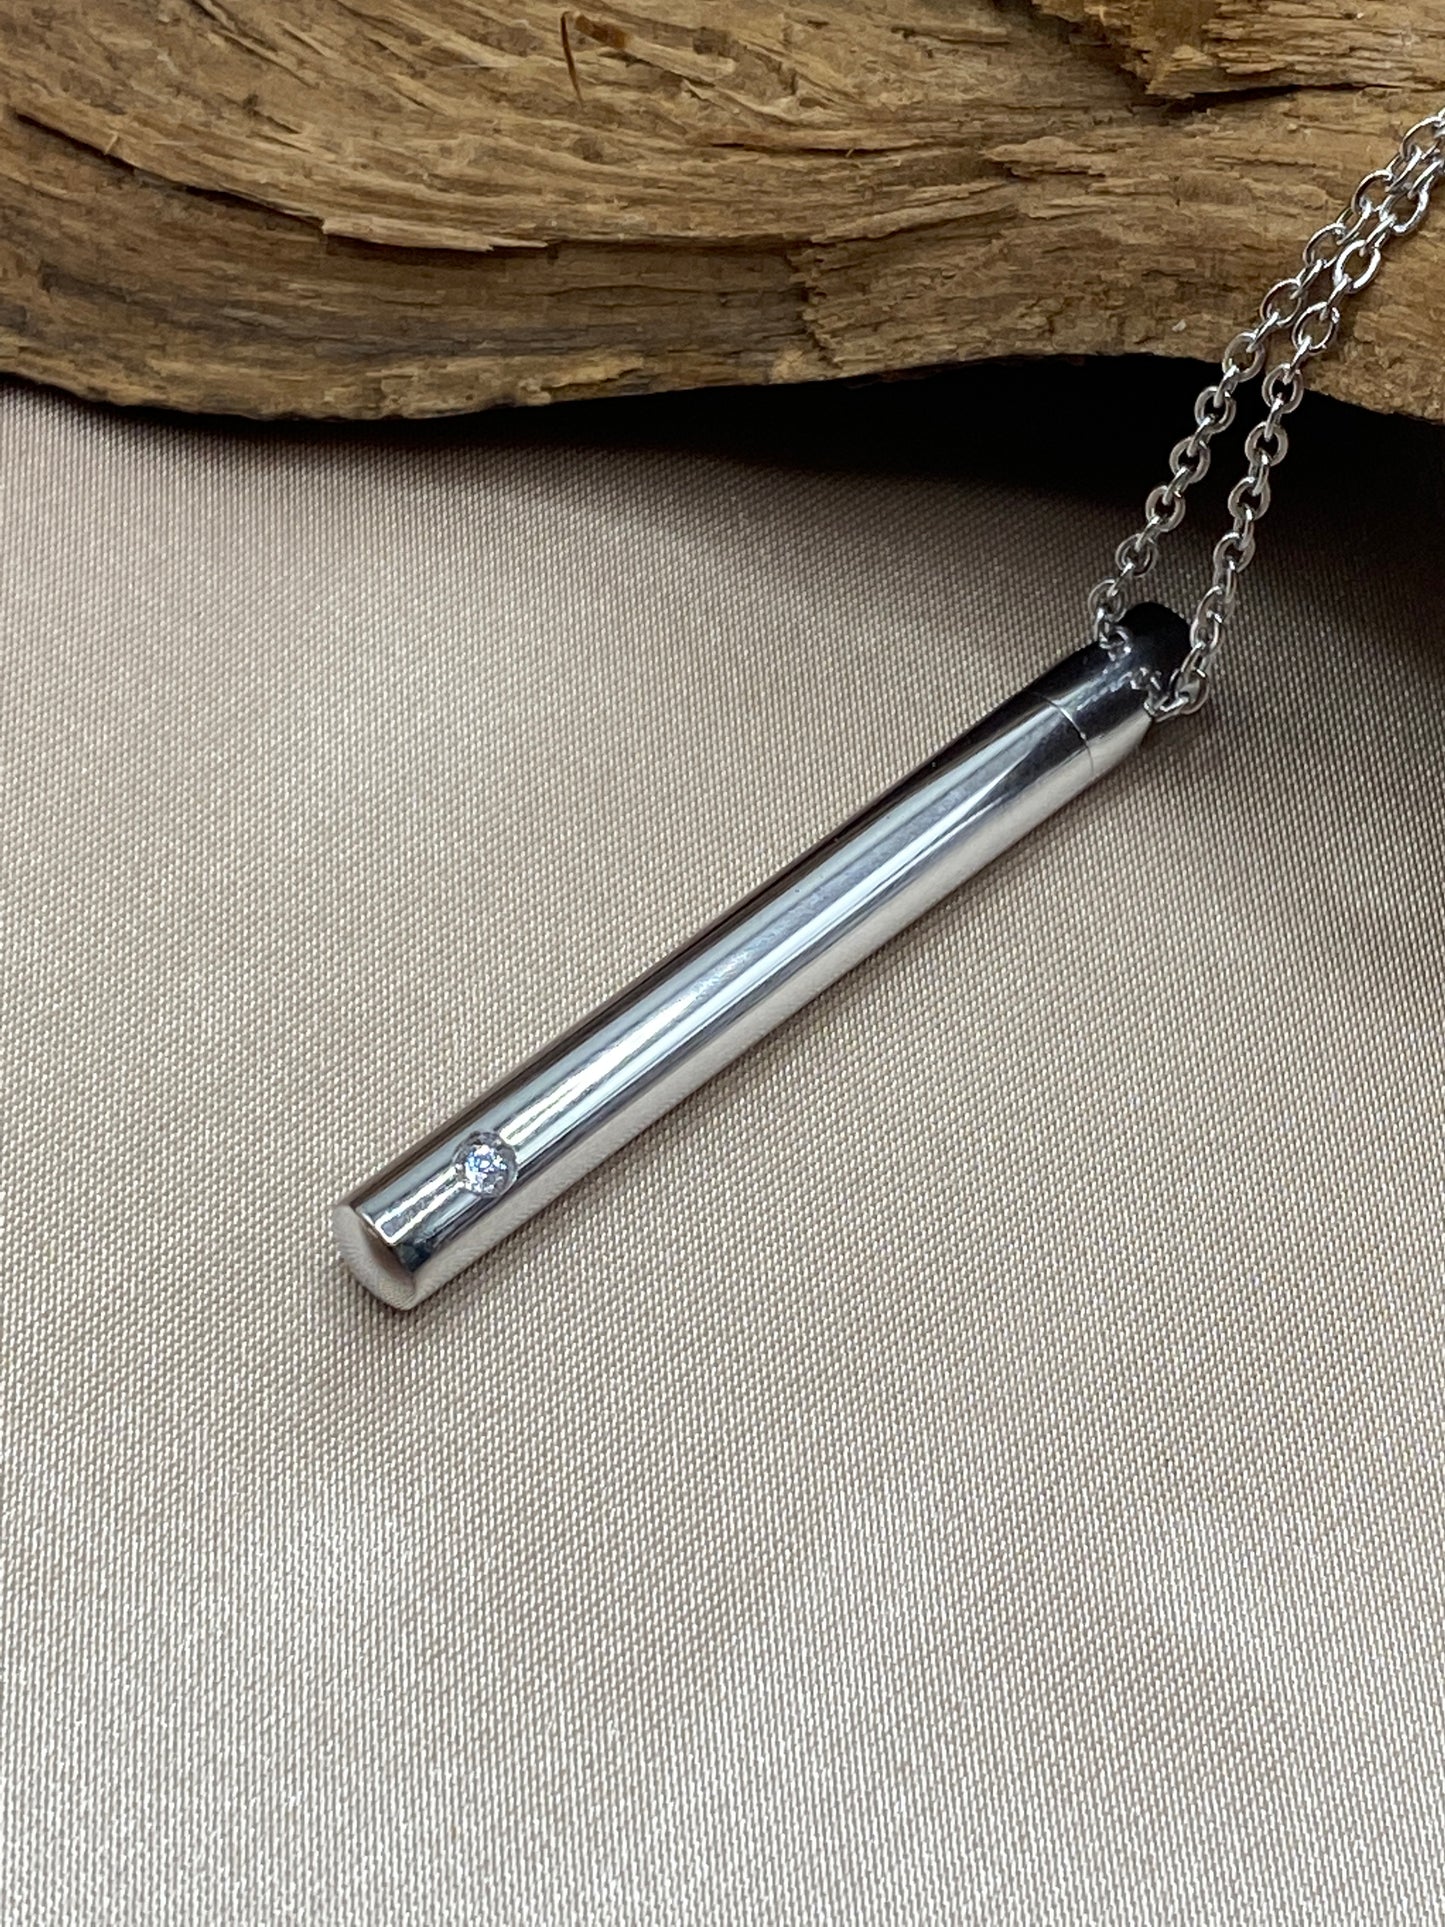 Silver Cylinder Cremation Urn Necklace with Clear Stone - Dainty Stainless Steel Memorial Jewelry for Holding Human or Pet Ashes